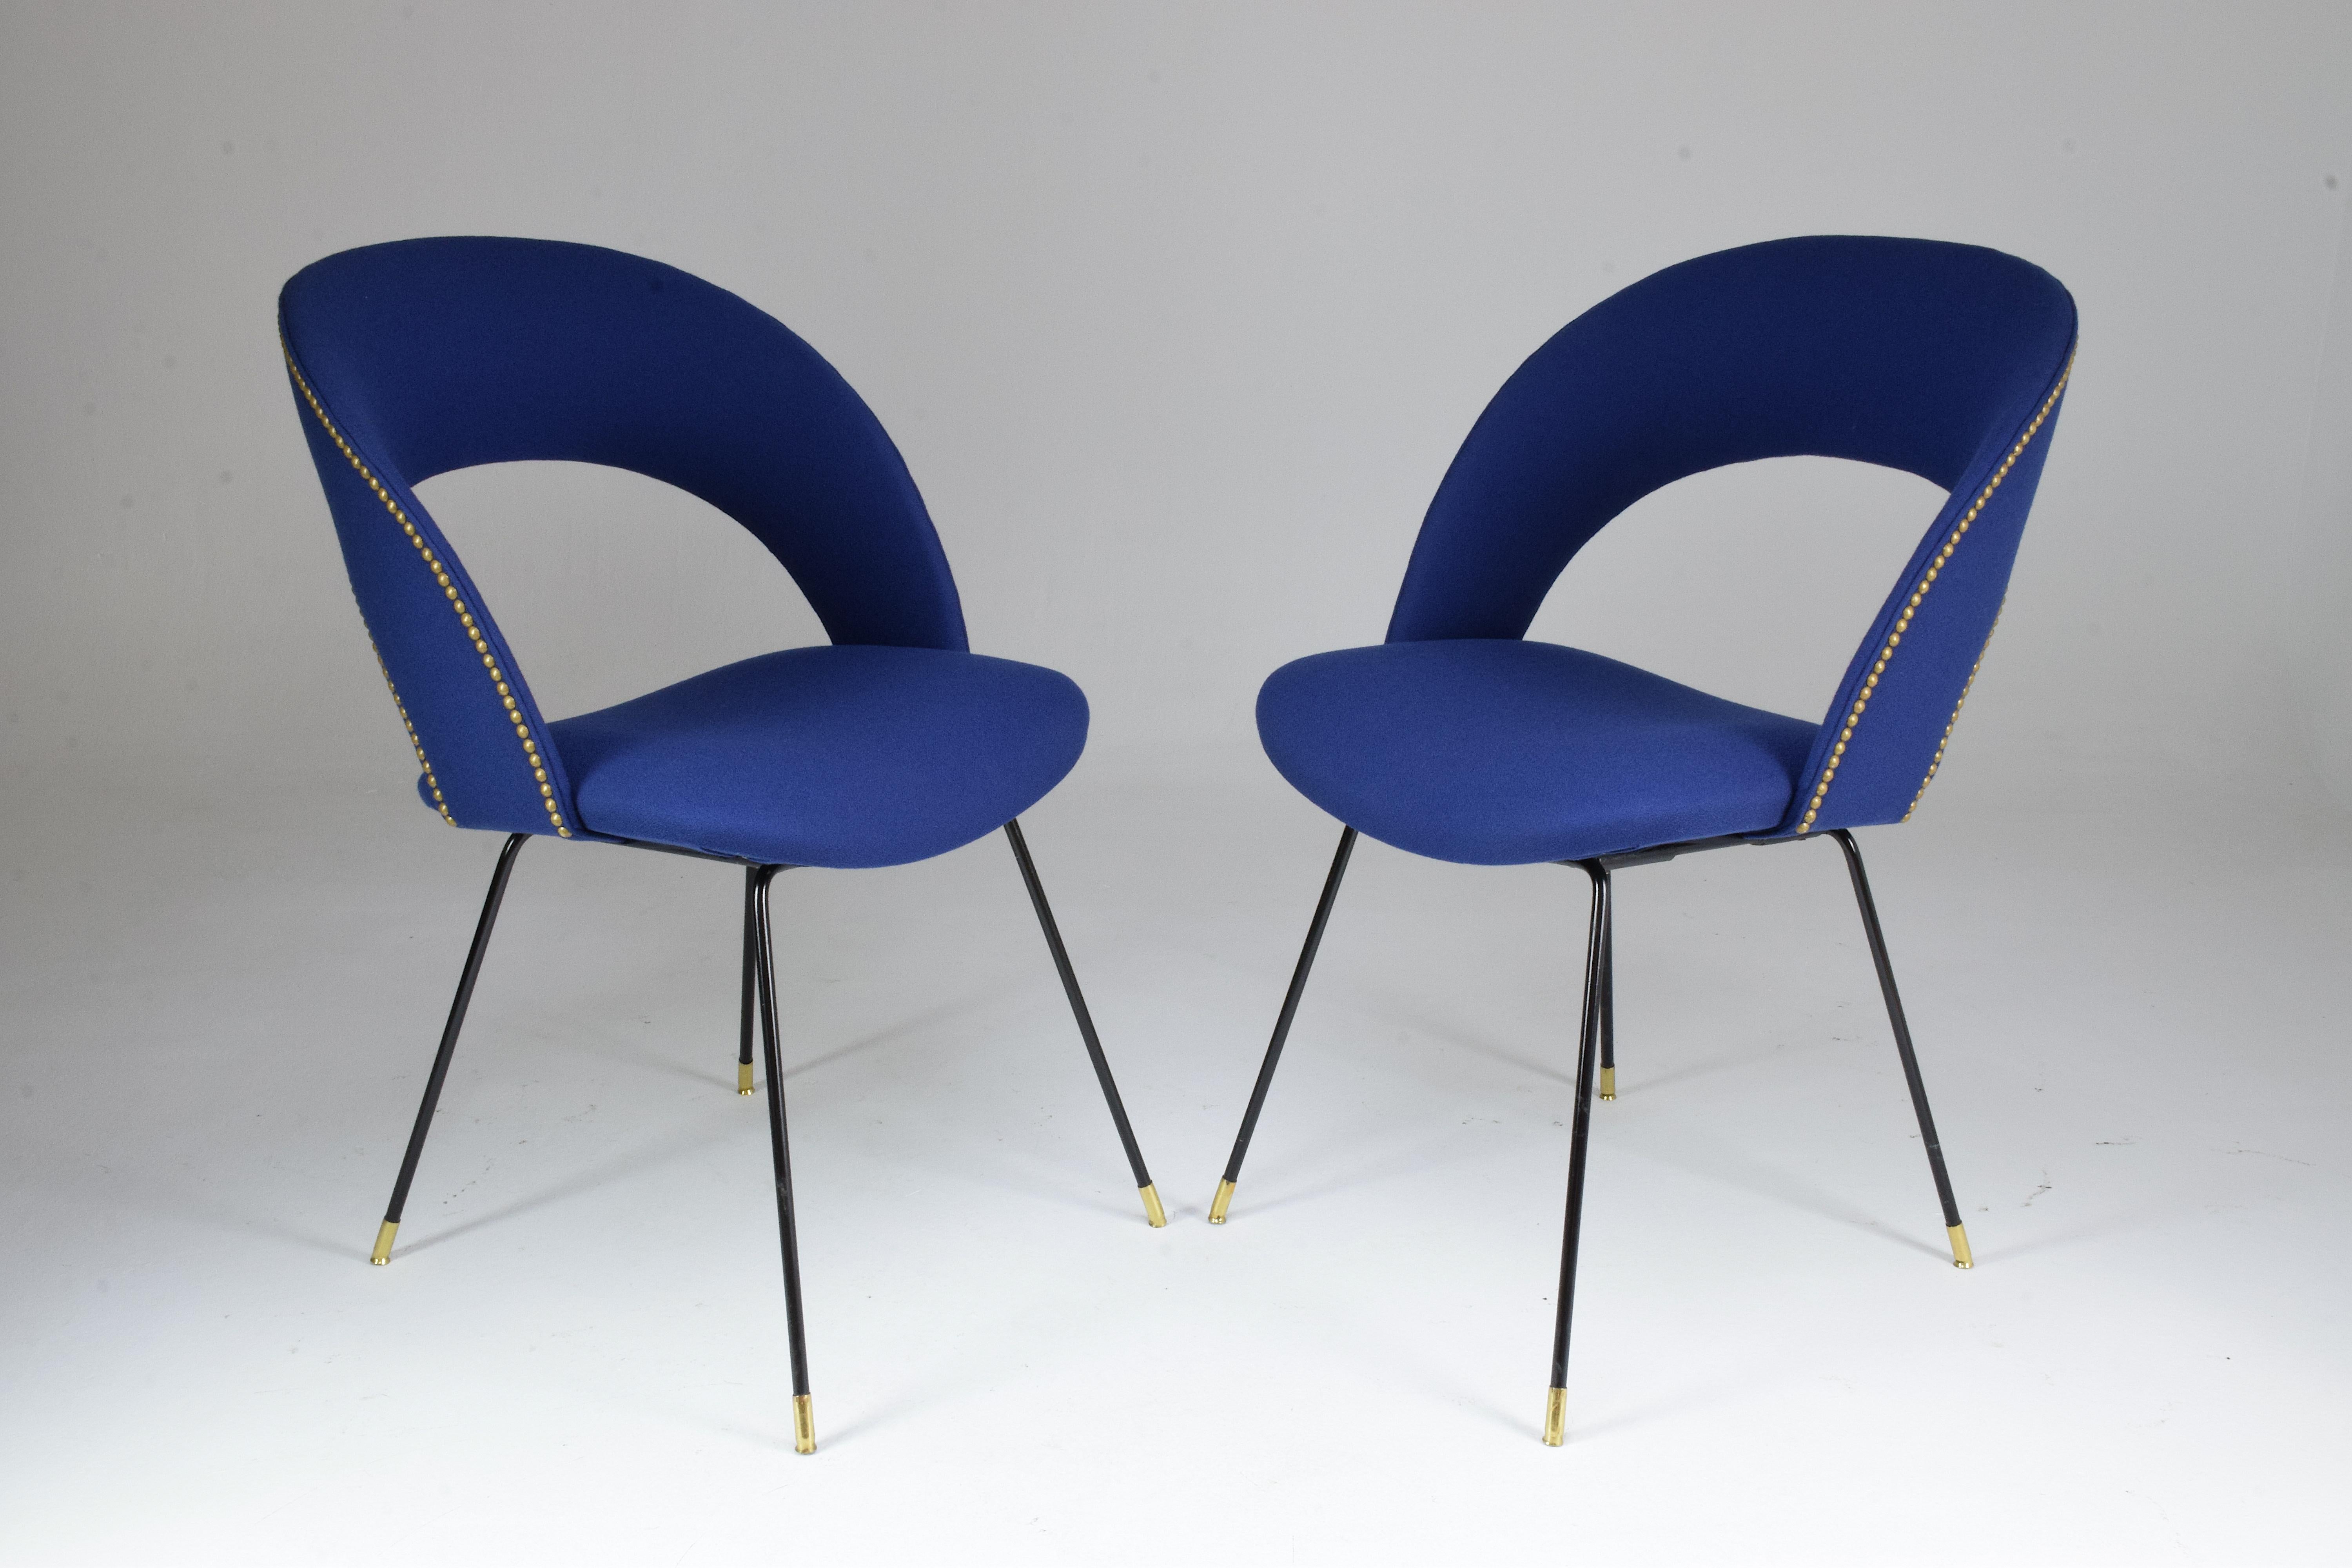 A pair of 20th century collectible side or accent chairs by Gastone Rinaldi for Rima who was one of Poltrona Frau's most emblematic designers of the midcentury period.

All our pieces are fully restored at our atelier and we only offer items that